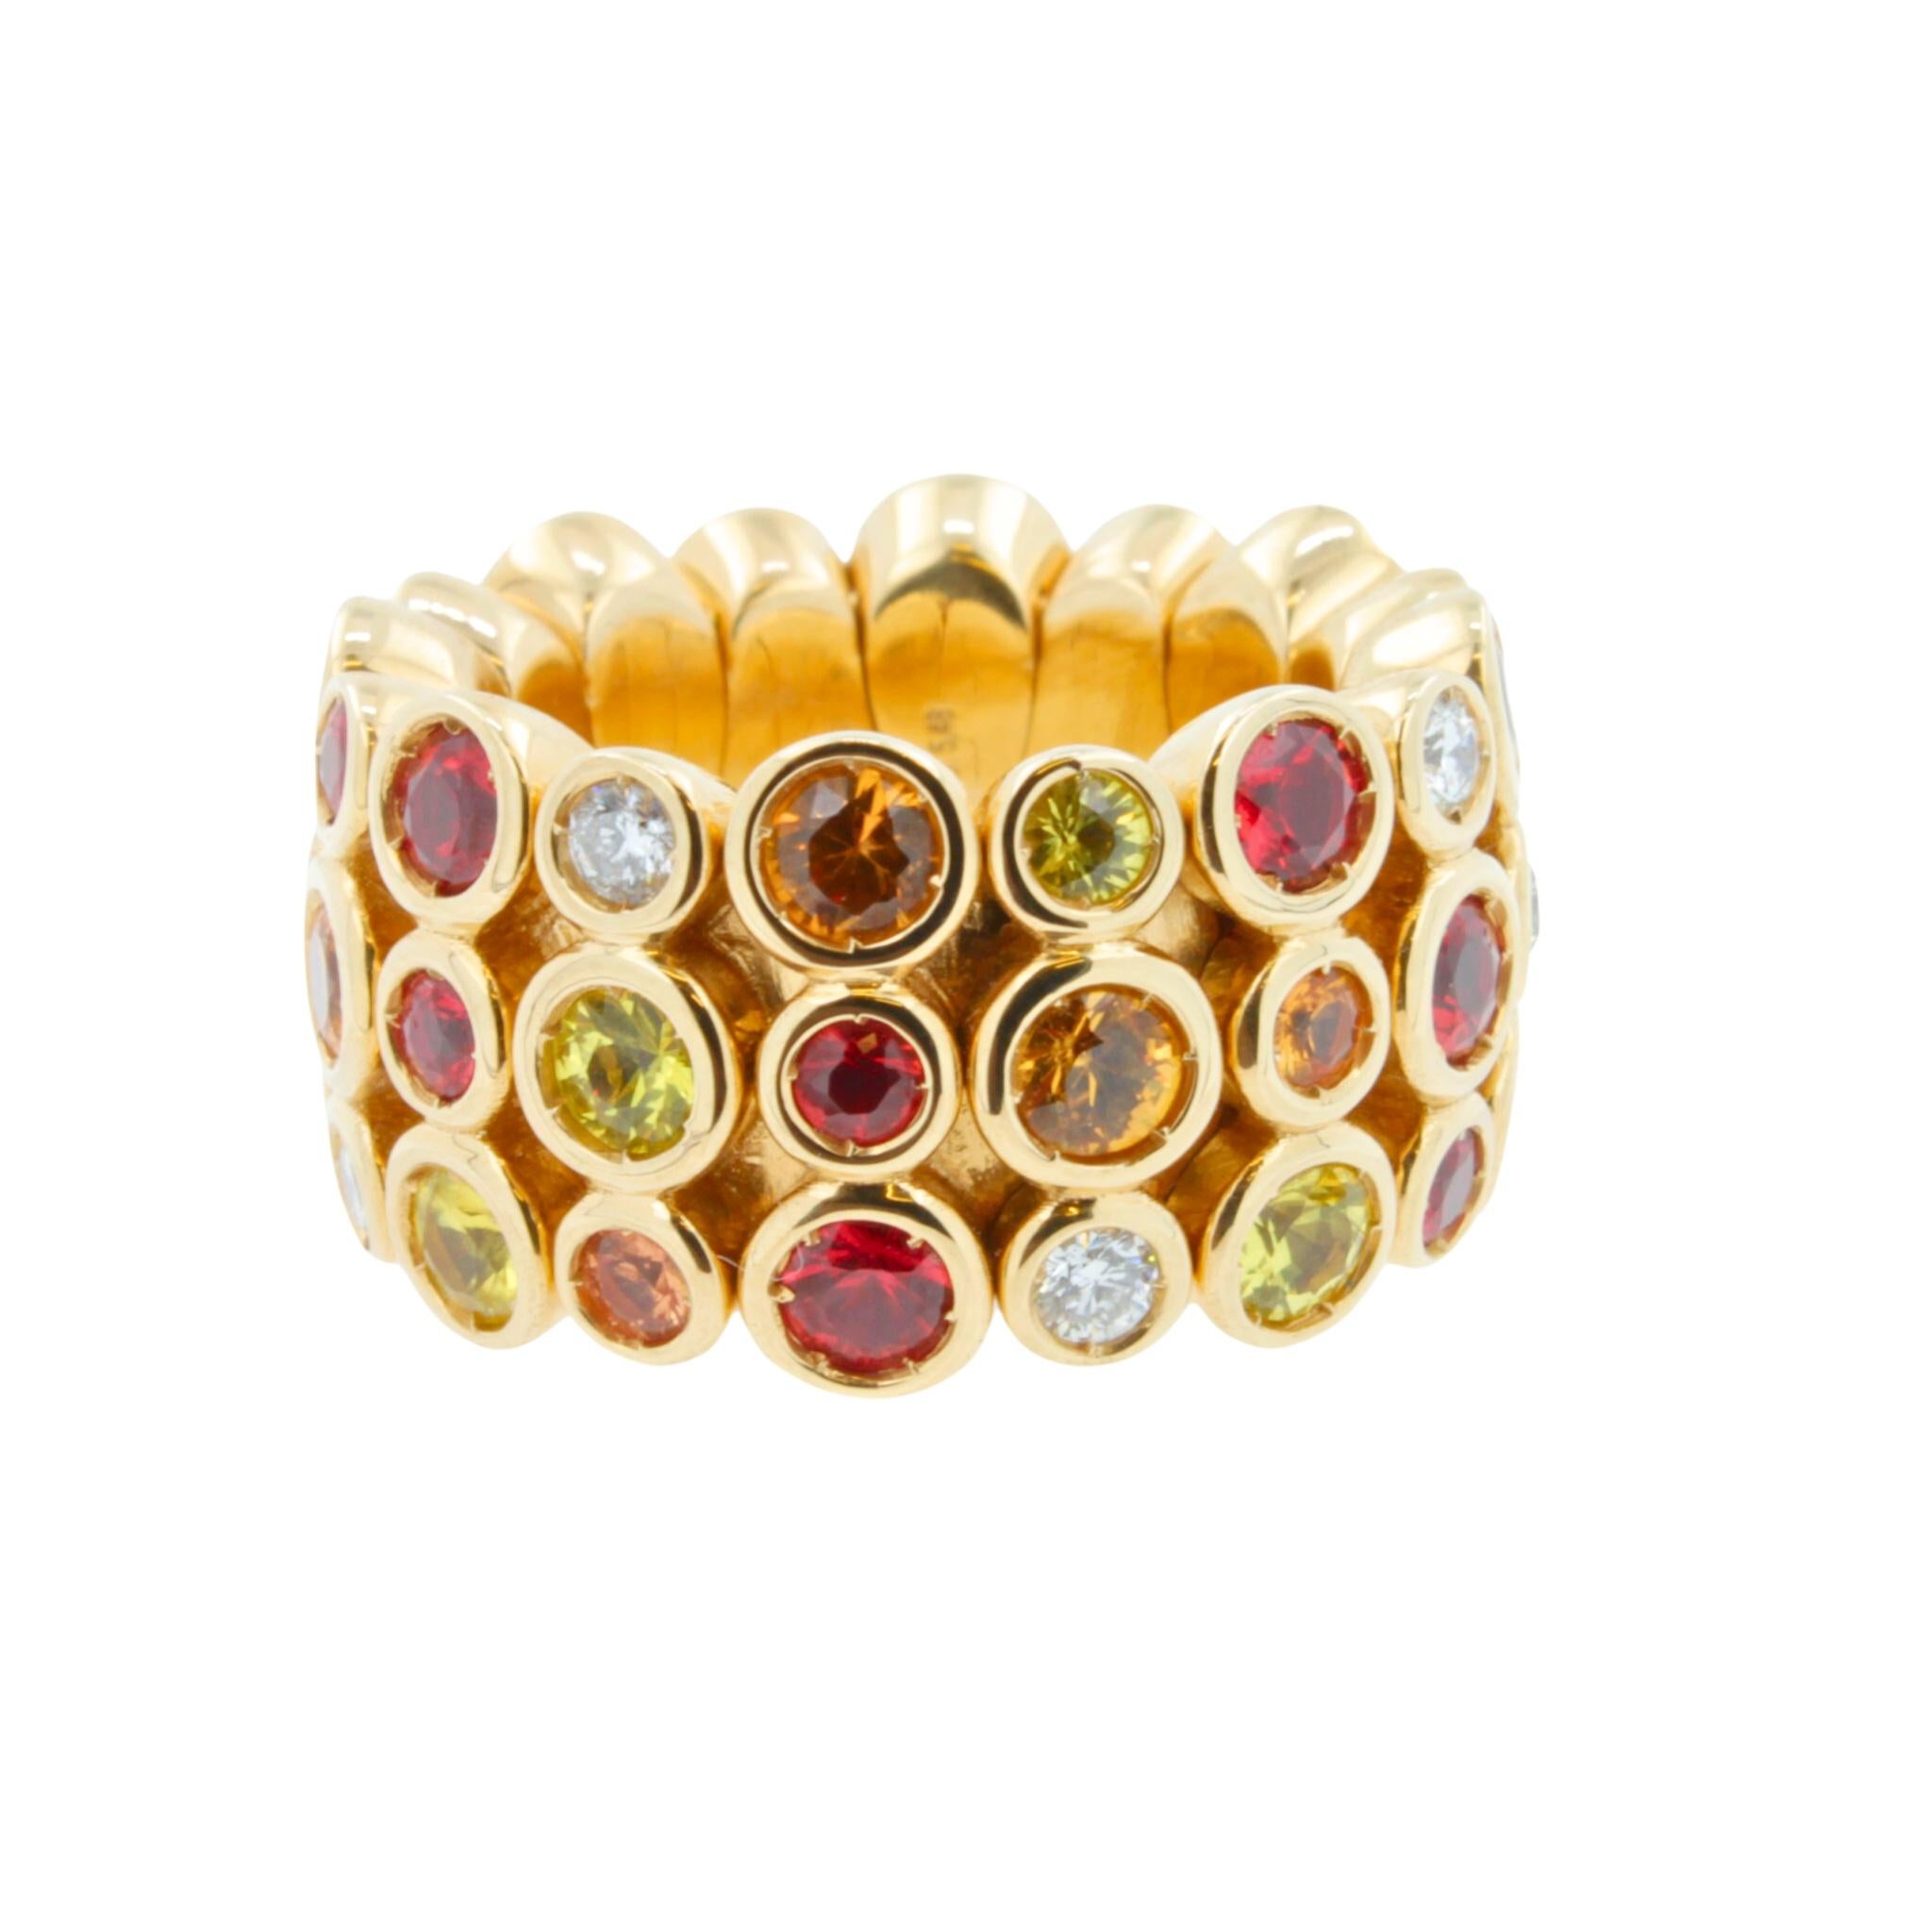 Multi Color Sunset Fire Eternity Patterns Ring

Red Ruby Orange Yellow Sapphire Diamond Eternity Band 18 Karat Yellow Gold Ring 

Jewels inspired by the colourful Art Deco movement. Lively designs and colorful Interpretations in a triple row